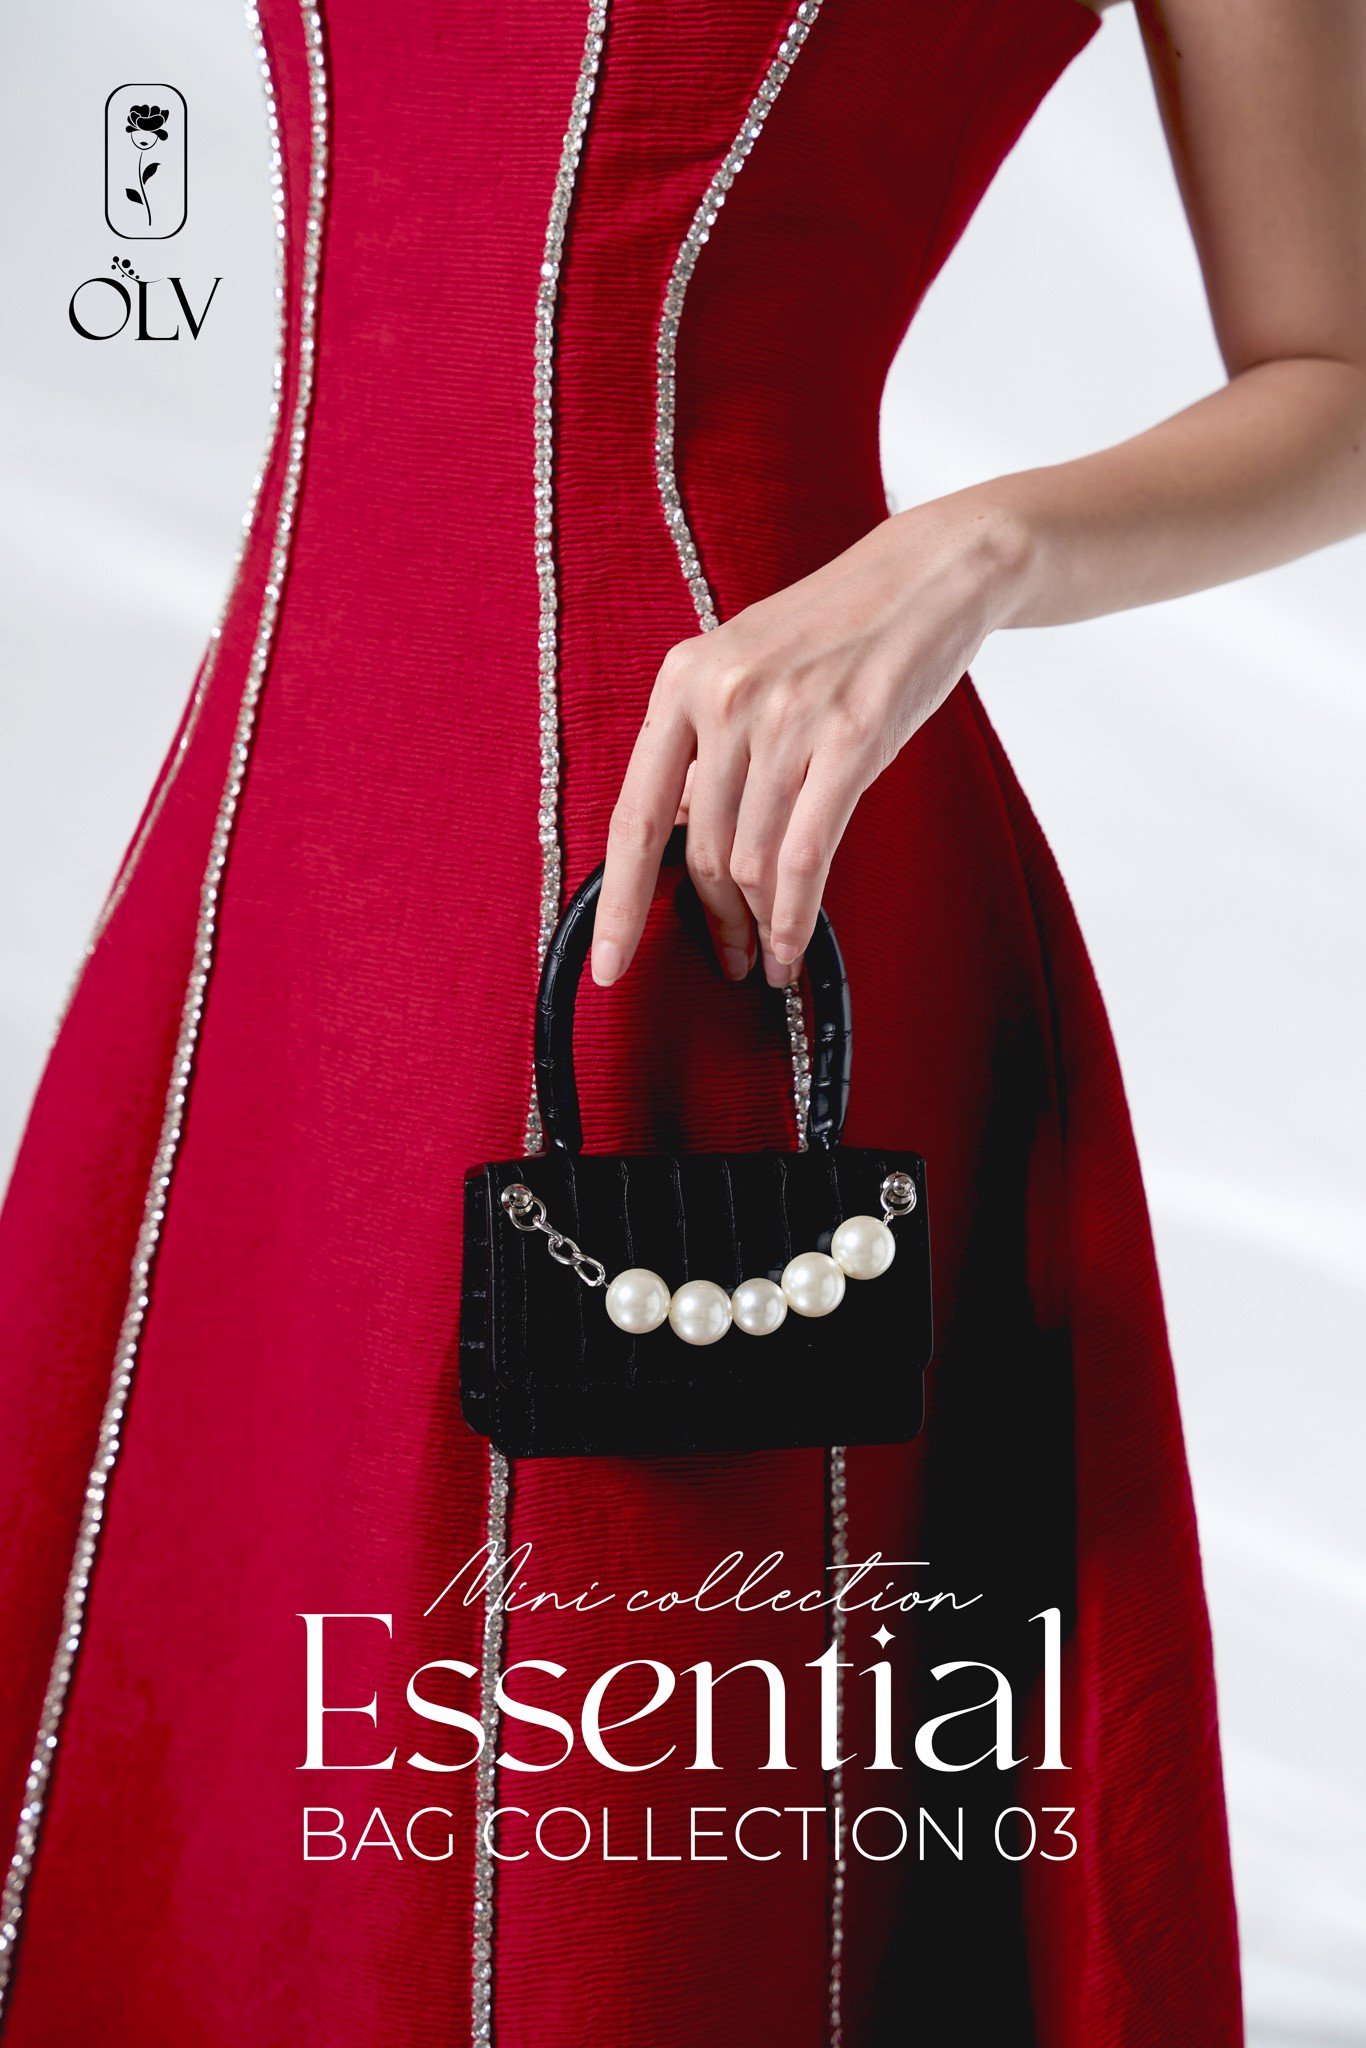 essential bag collection 03